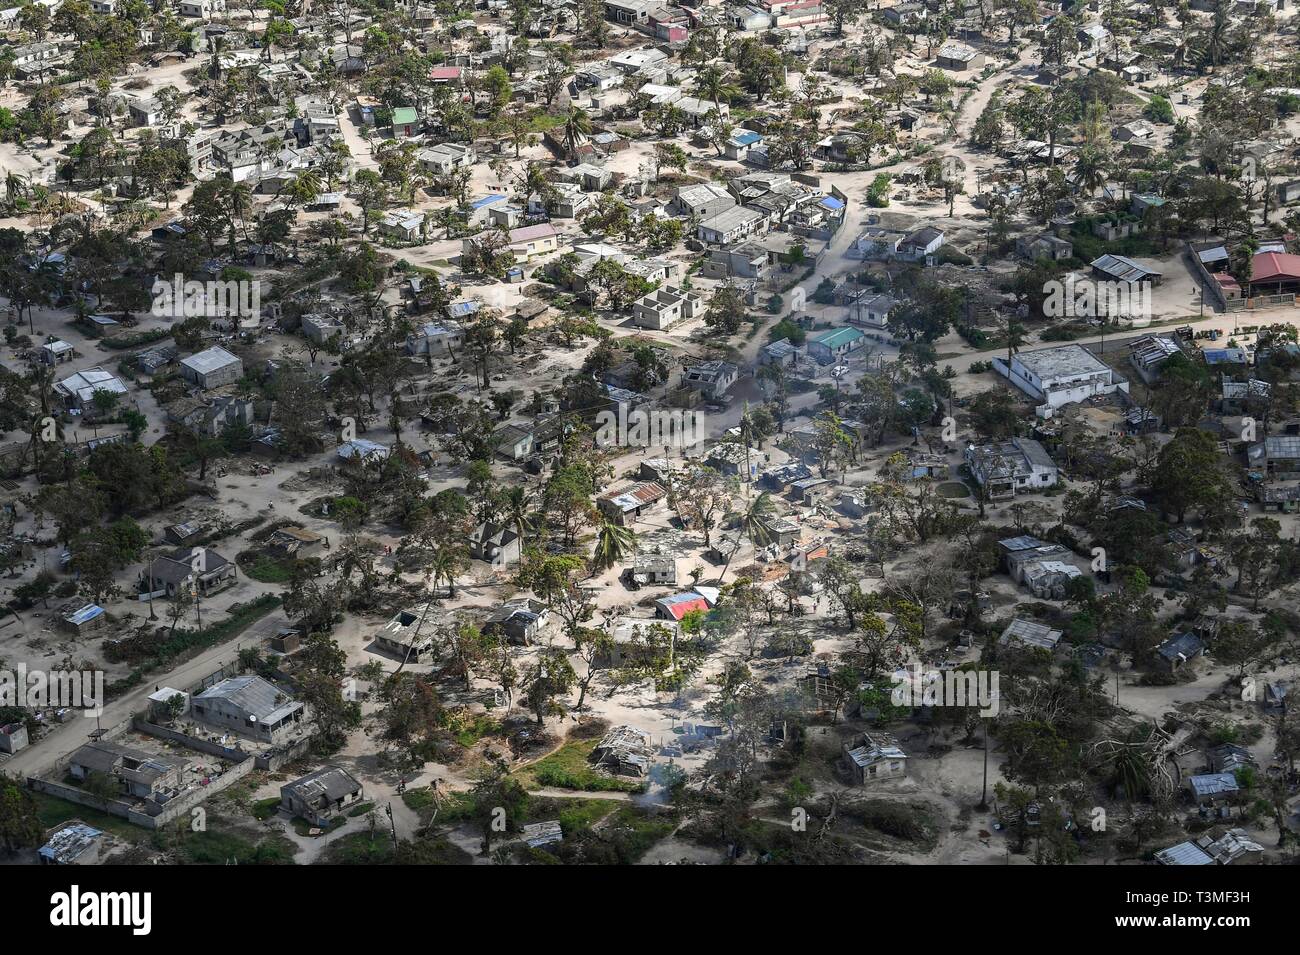 An aerial view of the aftermath of the massive Cyclone Idai destroying huge swaths of the region April 8, 2019 near Bebedo, Mozambique. The World Food Programme, with help from the U.S. Air Force is transporting emergency relief supplies to assist the devastated region. Stock Photo